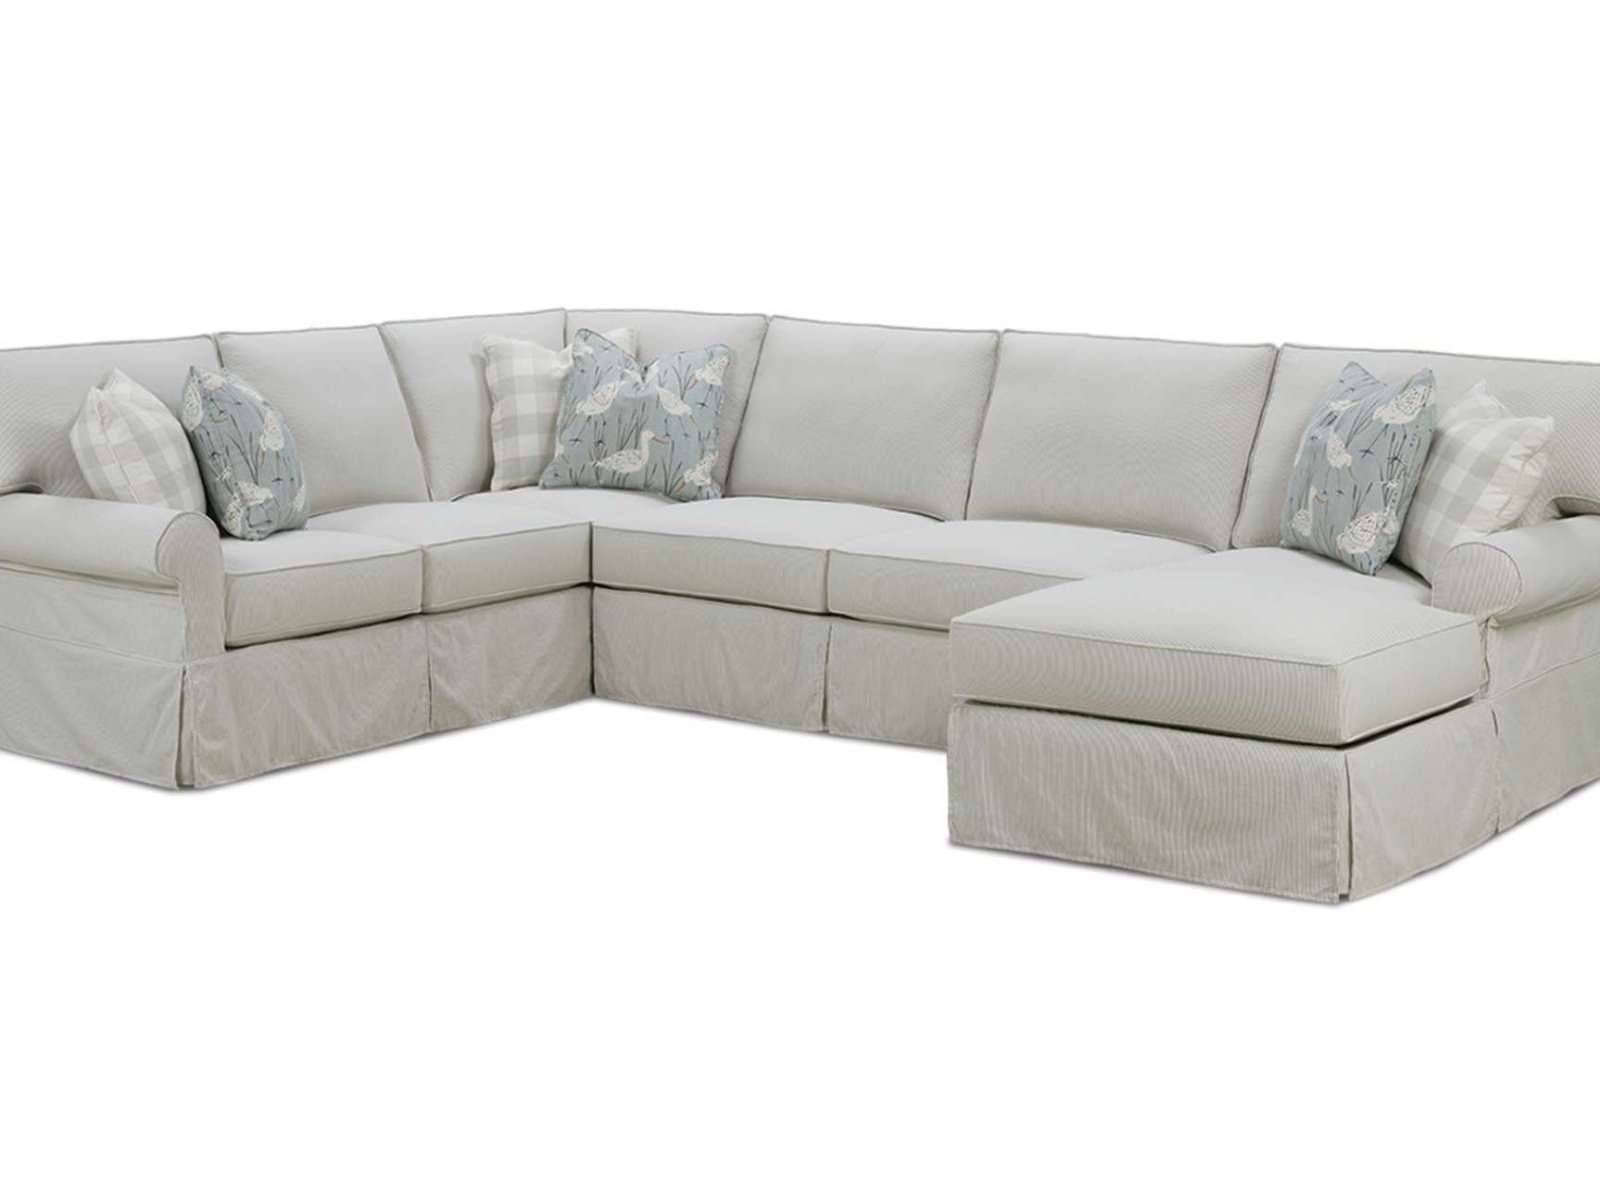 ▻ Sofa : 39 Slipcovers For Sectionals Bed Bath And Beyond Inside 3 Piece Sectional Sofa Slipcovers (View 30 of 33)